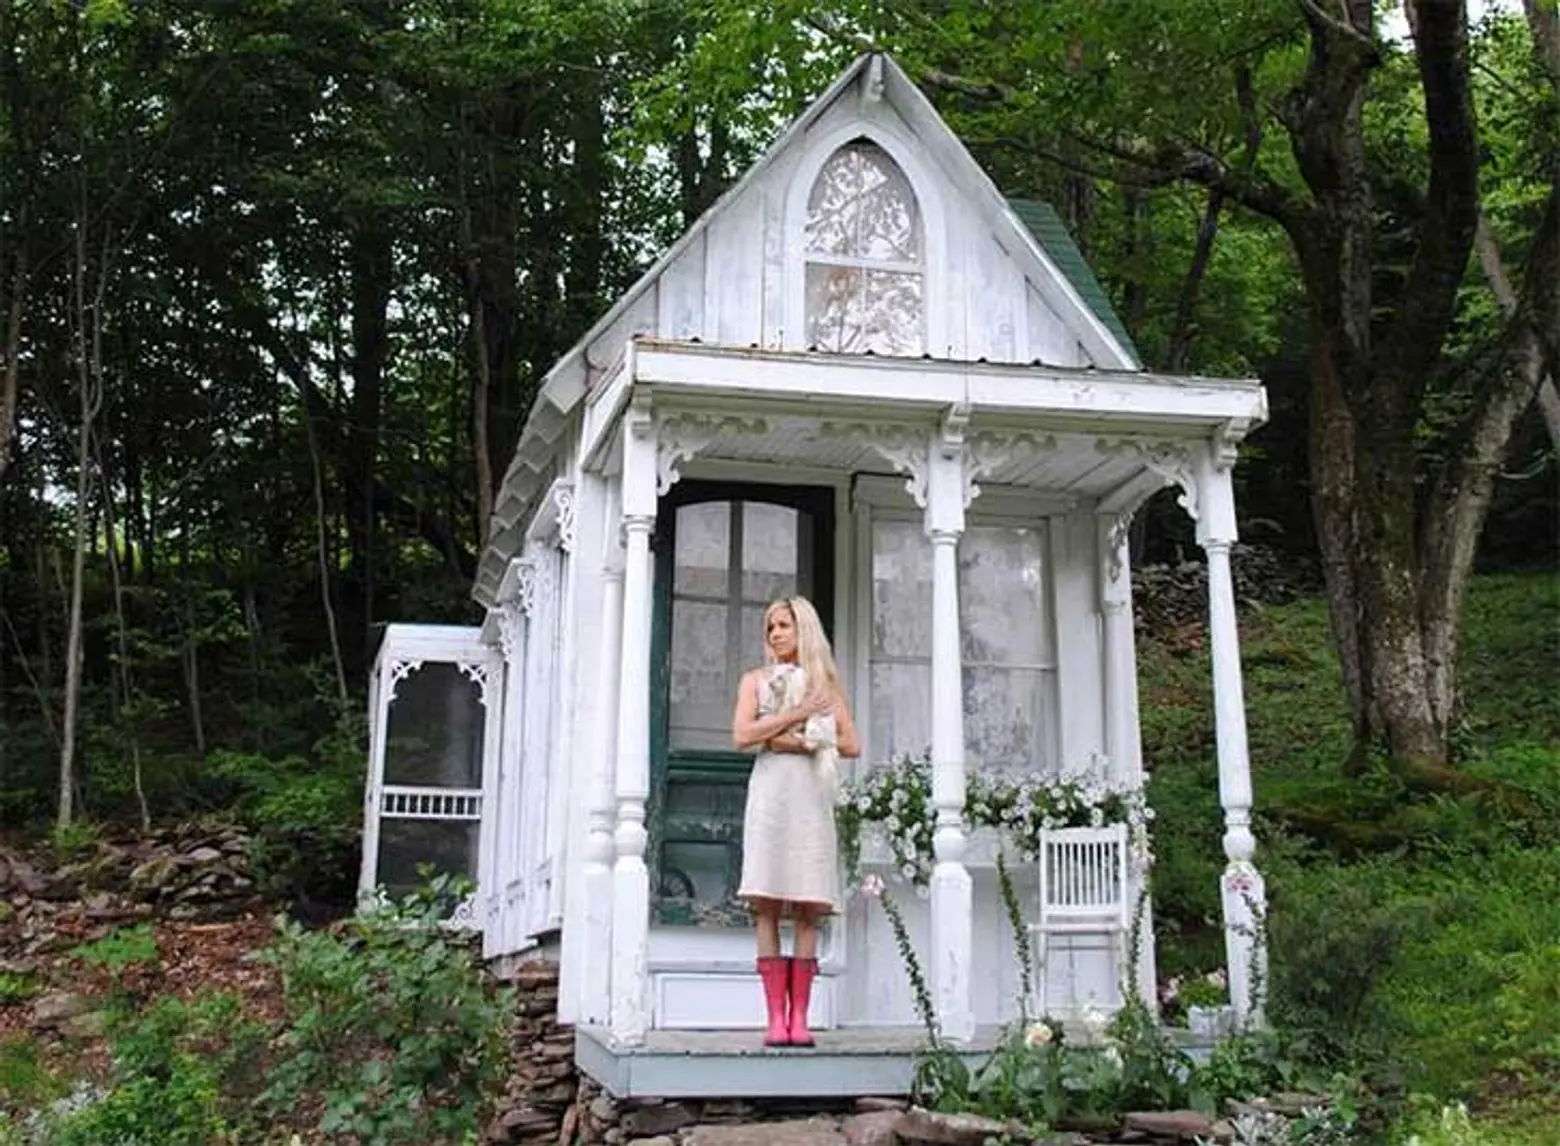 Wife Builds Her Own ‘She Shed’ in the Catskills Mountains